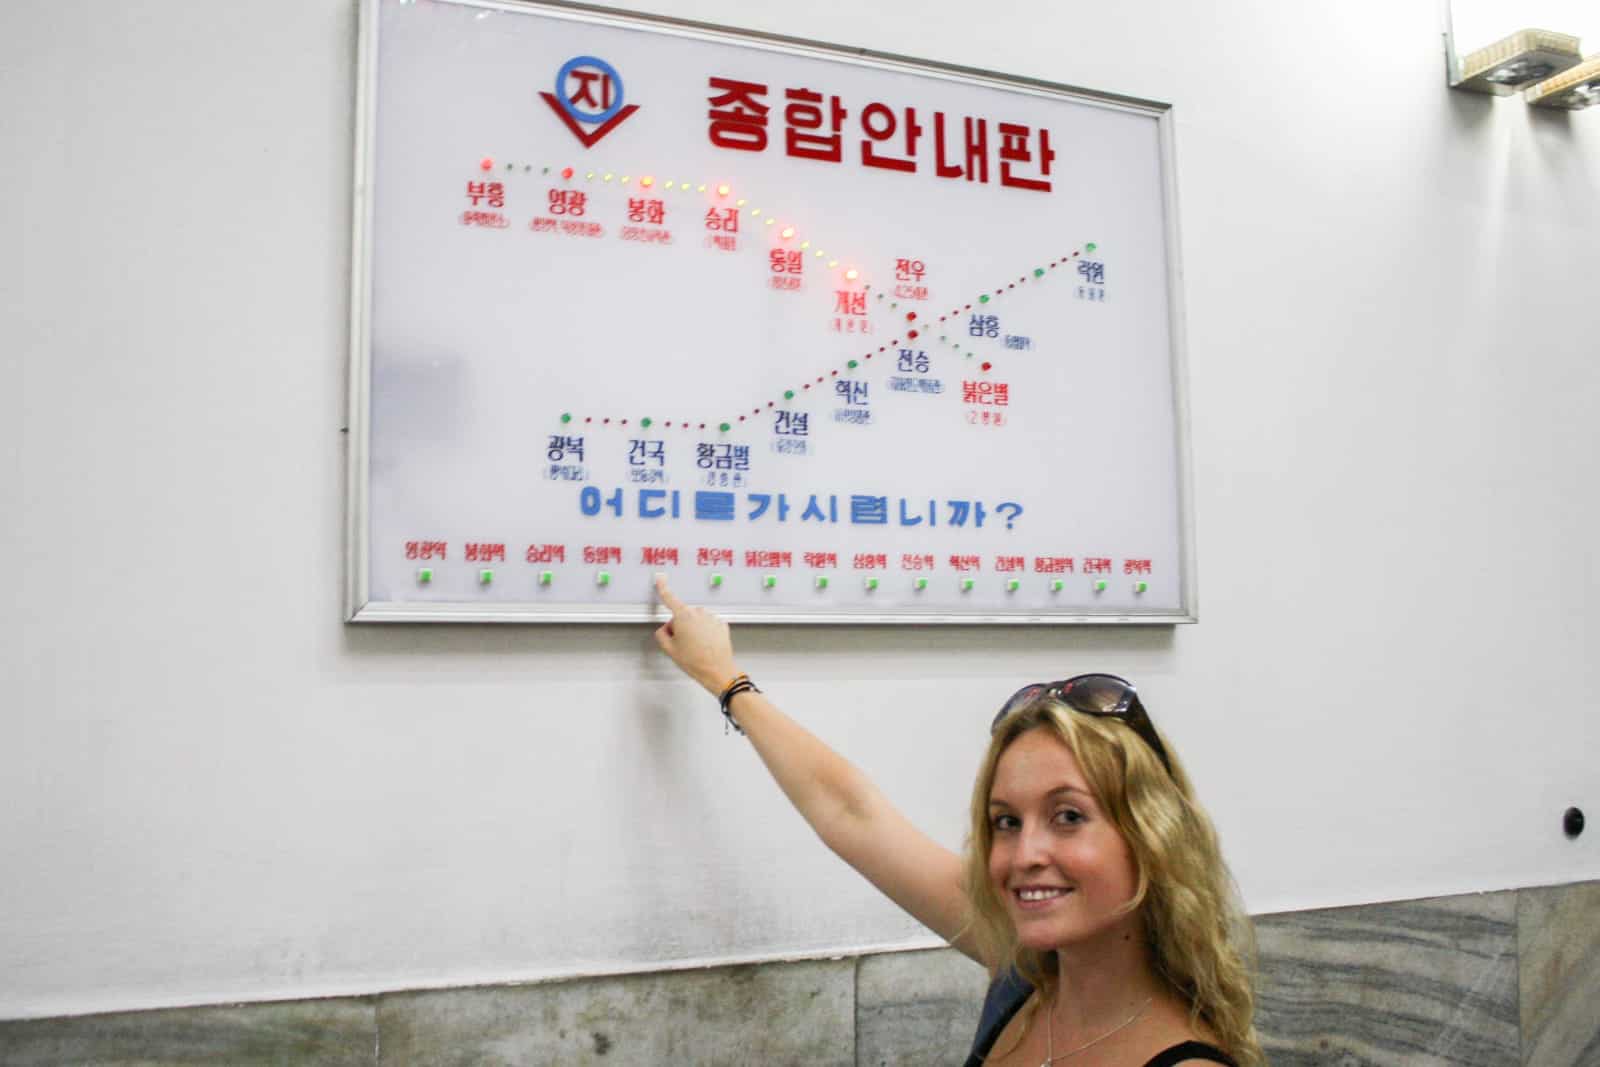 The metro stops in Pyongyang, North Korea that tourists are allowed to ride